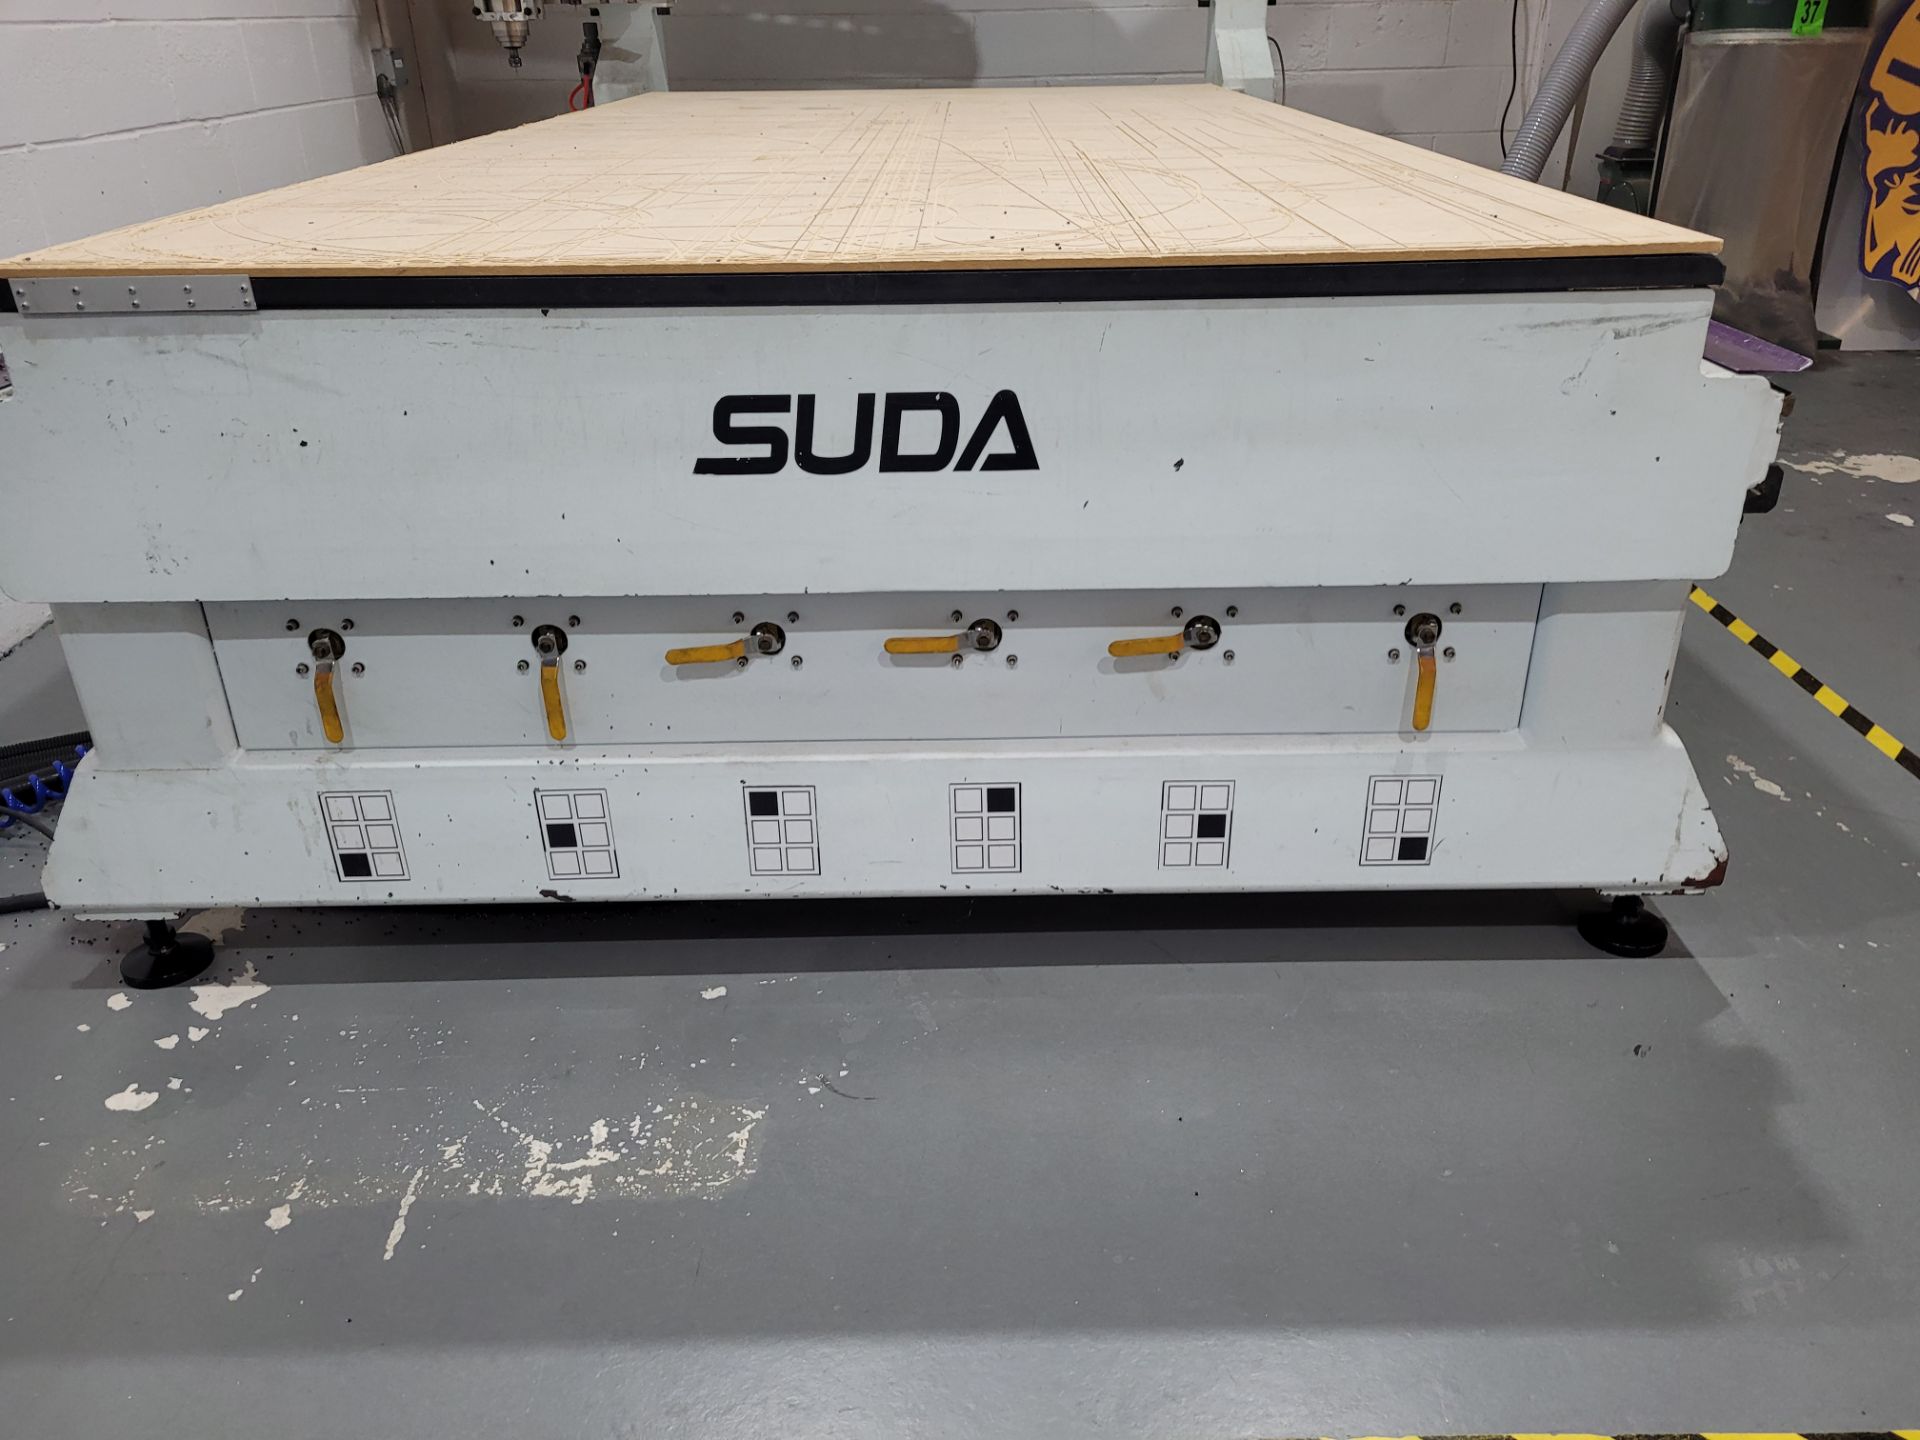 2015 SUDA ATC CNC Router mod. MG1630C, 3-Head System with Accessories and CRAFTEX mod. FM-300 Collec - Image 15 of 51